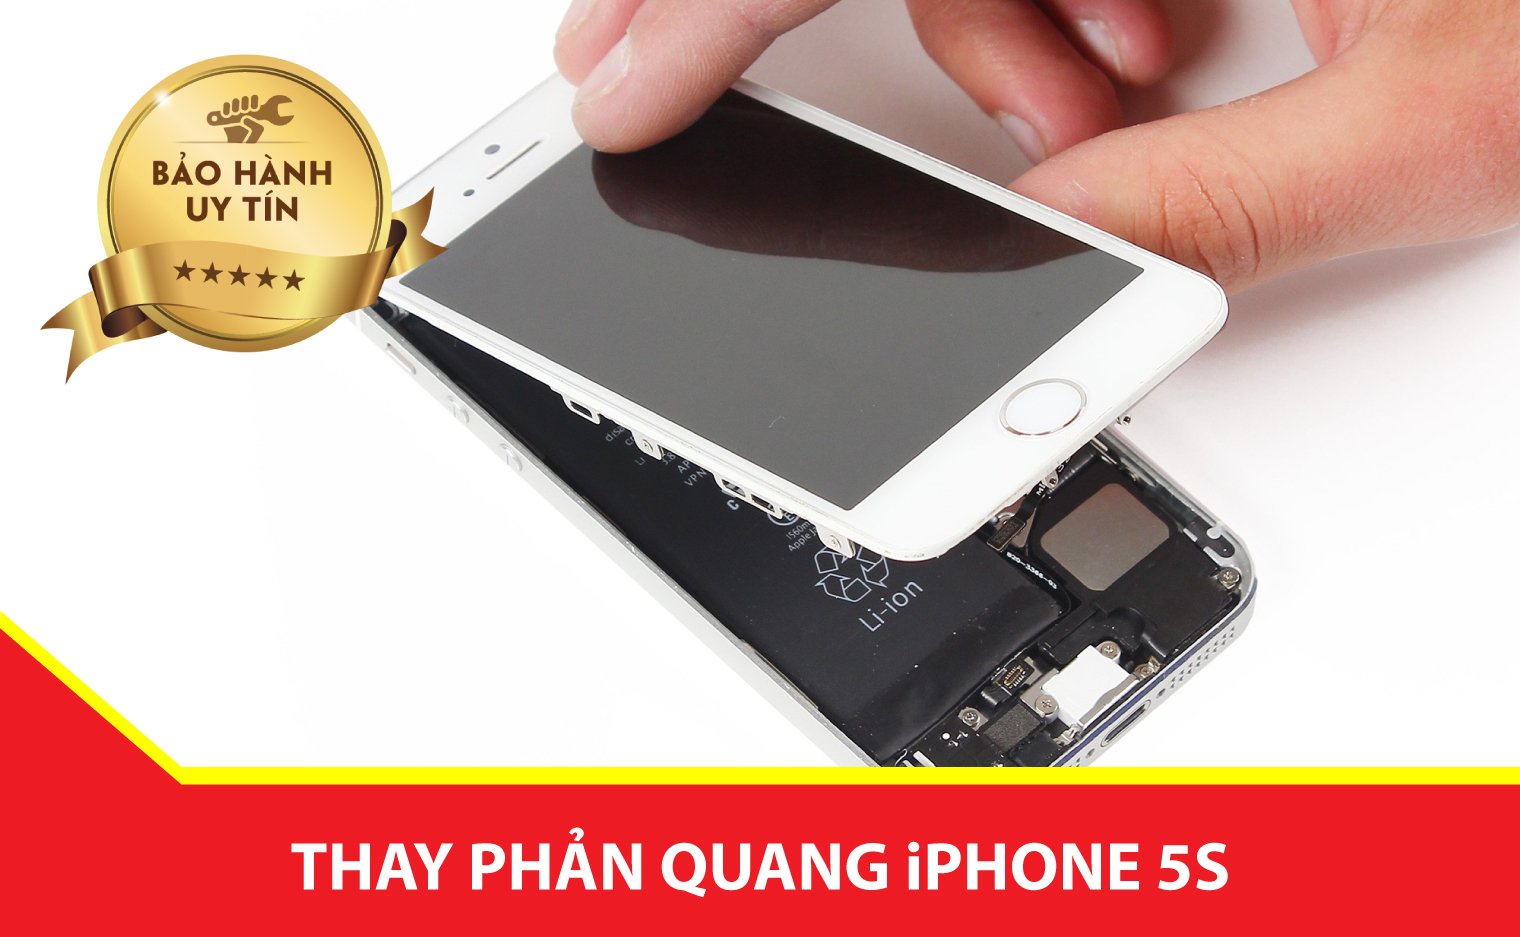 thay phan quang iphone 5s